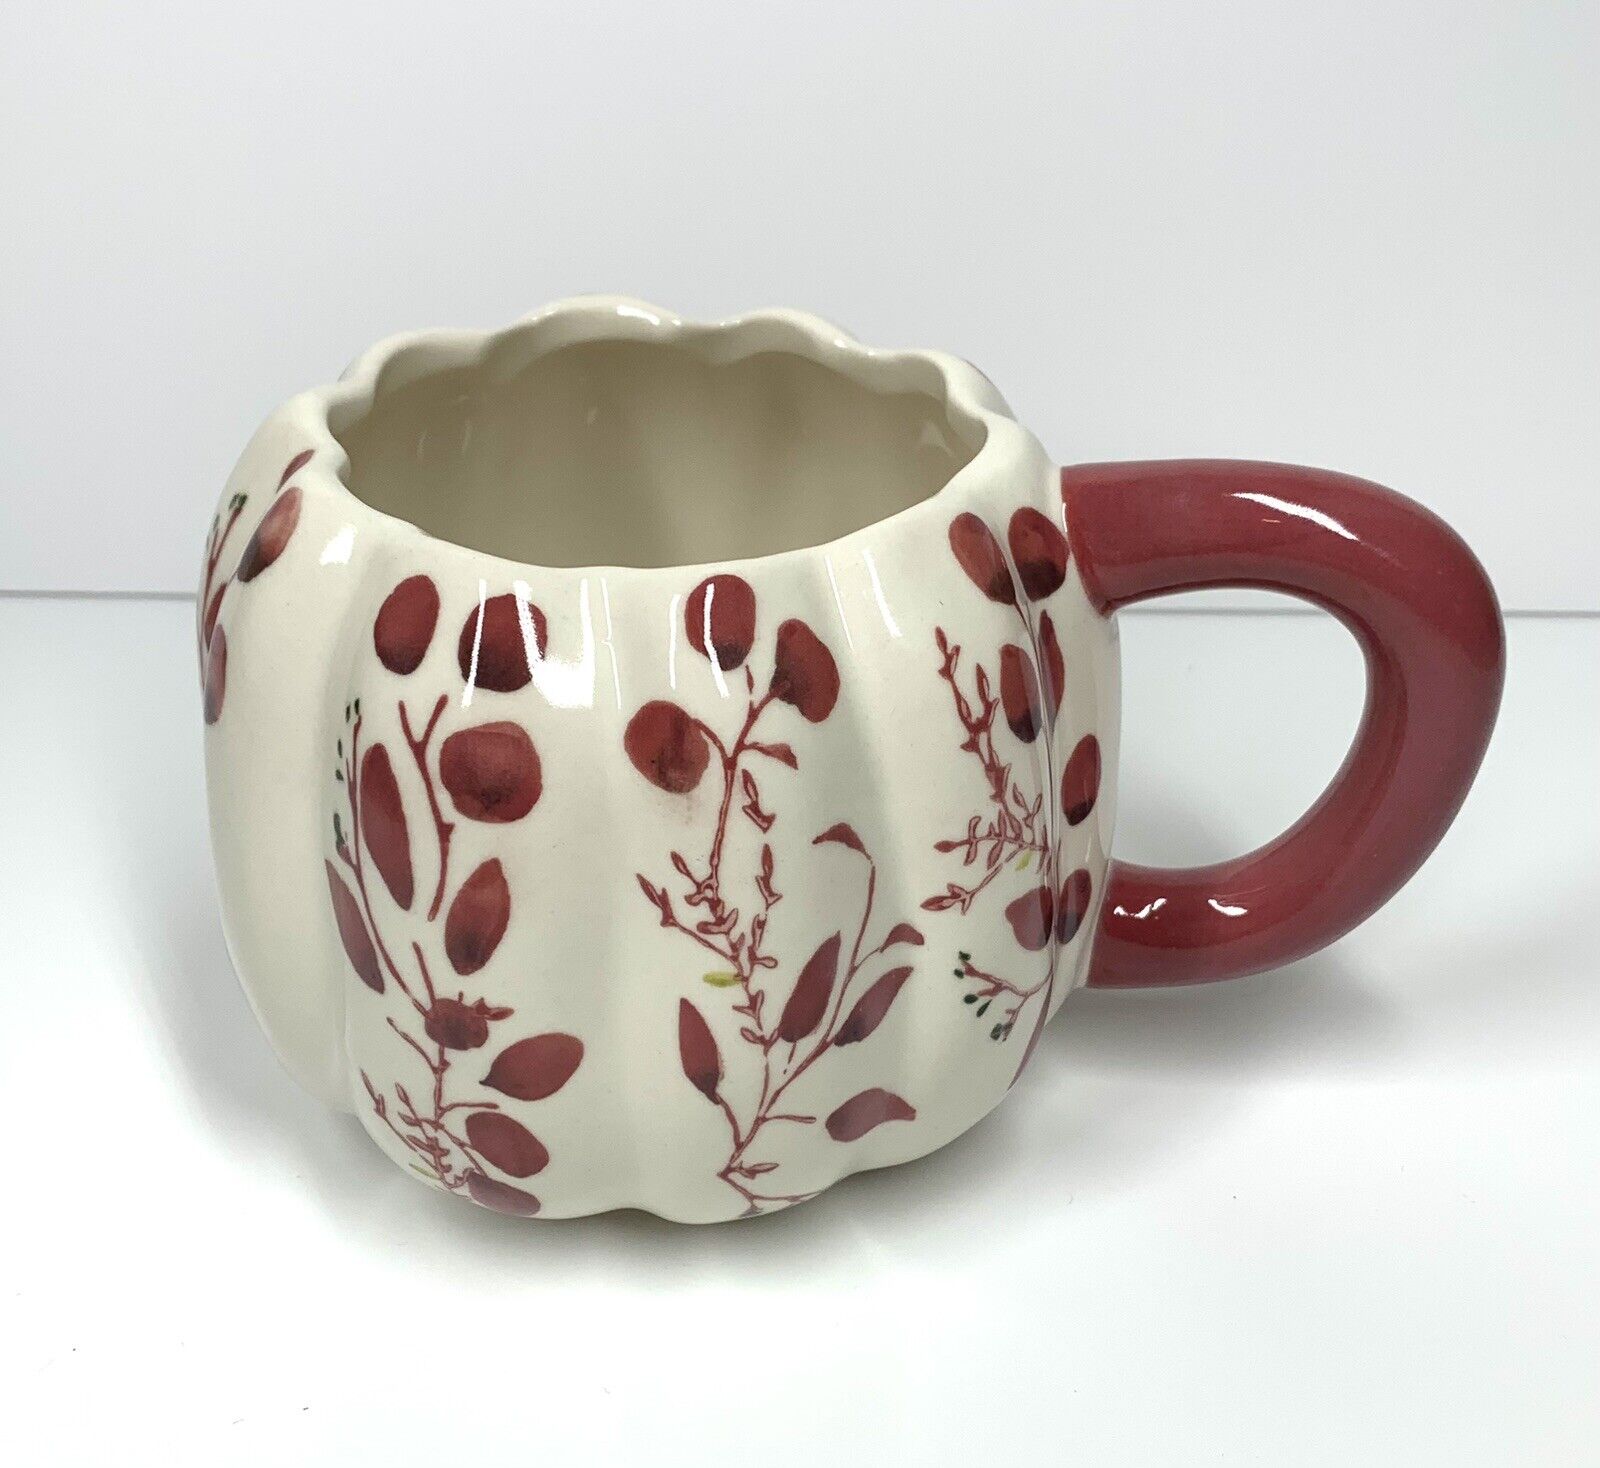 Anthropologie Floral Pumpkin Mug With Red Floral Inlay 20oz Handpainted EUC